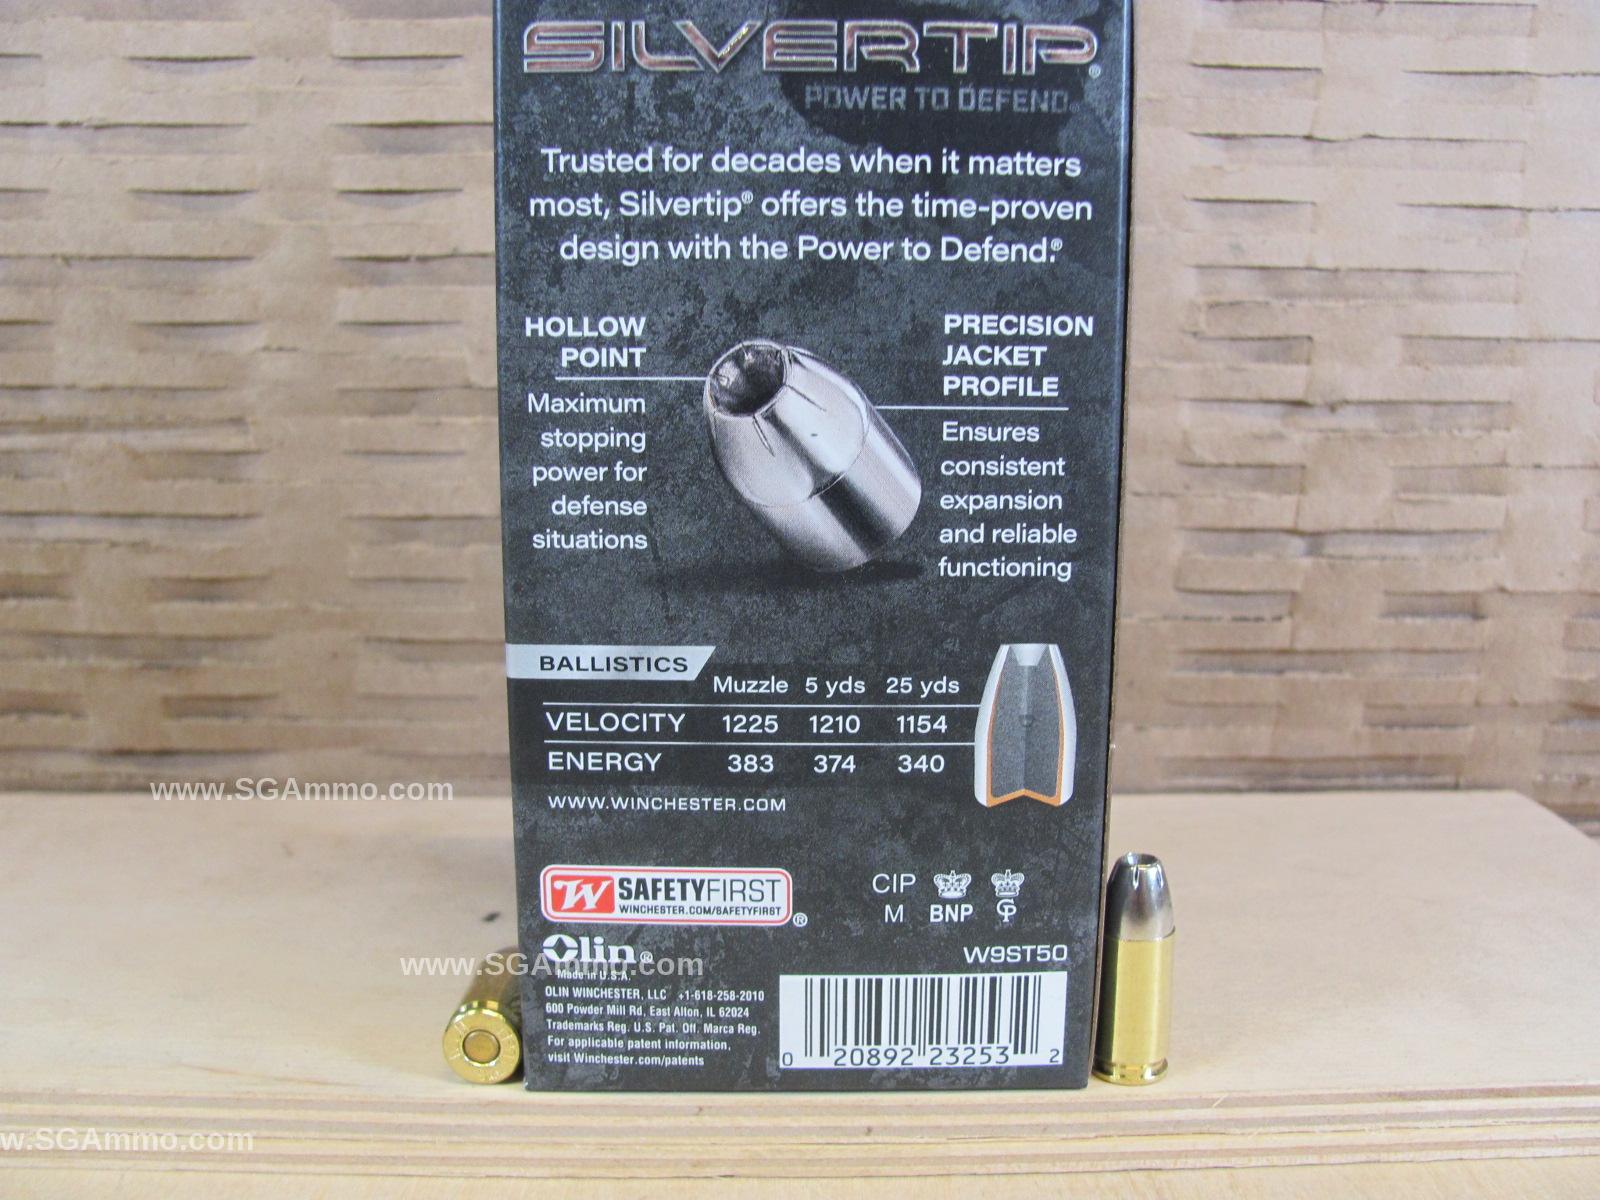 50 Round Box - 9mm Luger 115 Grain Winchester Silver Tip Defense Hollow  Point Ammo - W9ST50